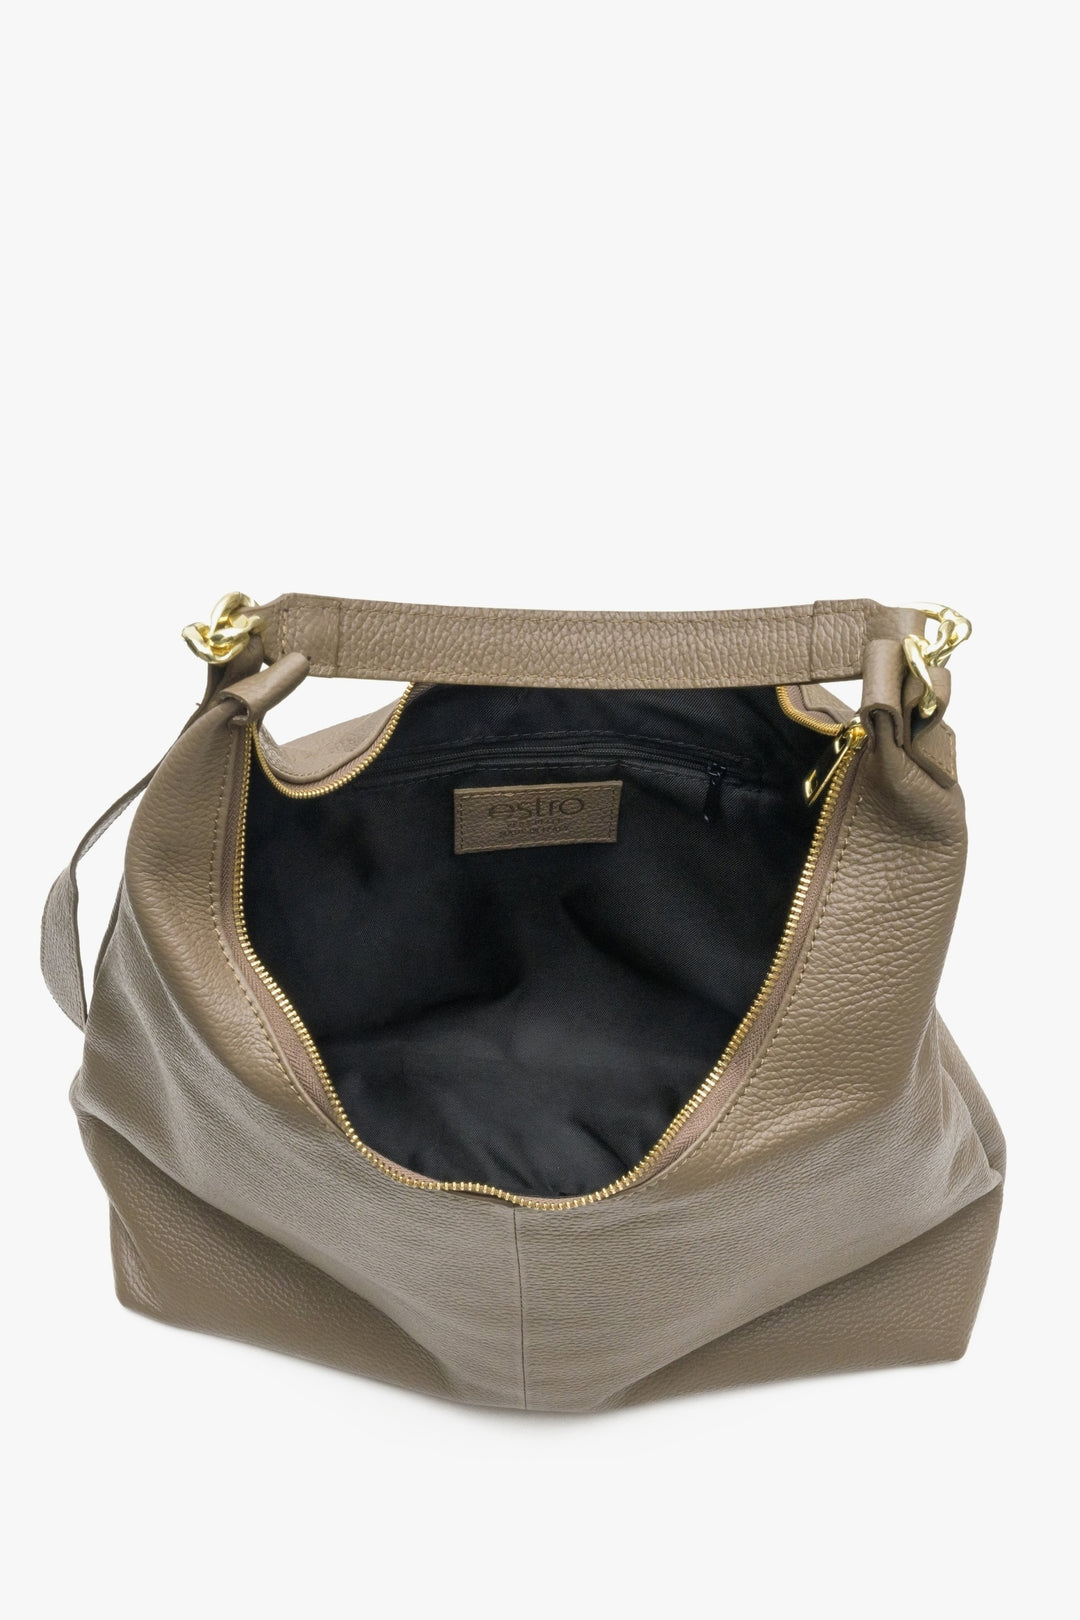 Women's beige shopper made of genuine leather by Estro - close-up of the interior design.